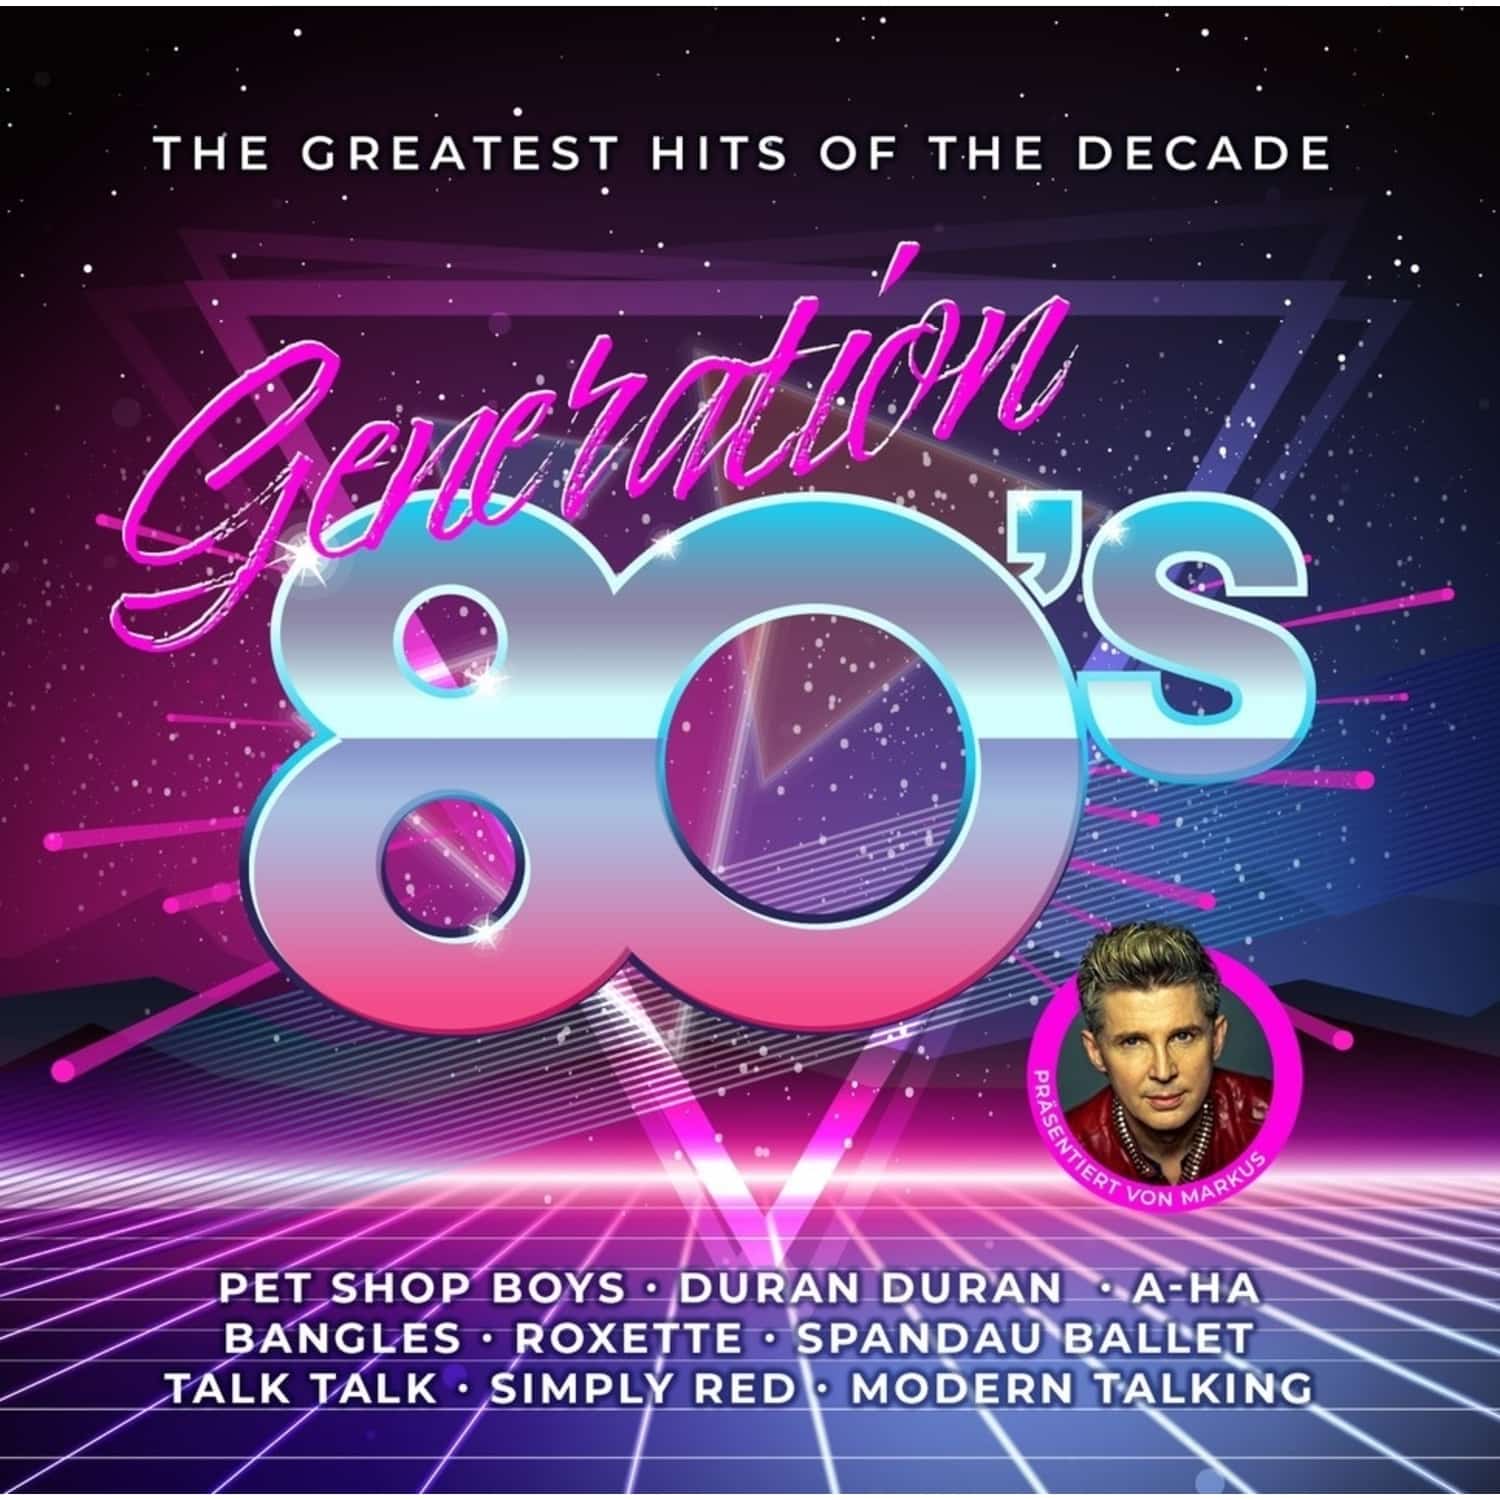 Markus - GENERATION 80S-THE GREATEST HITS OF THE DECADE 